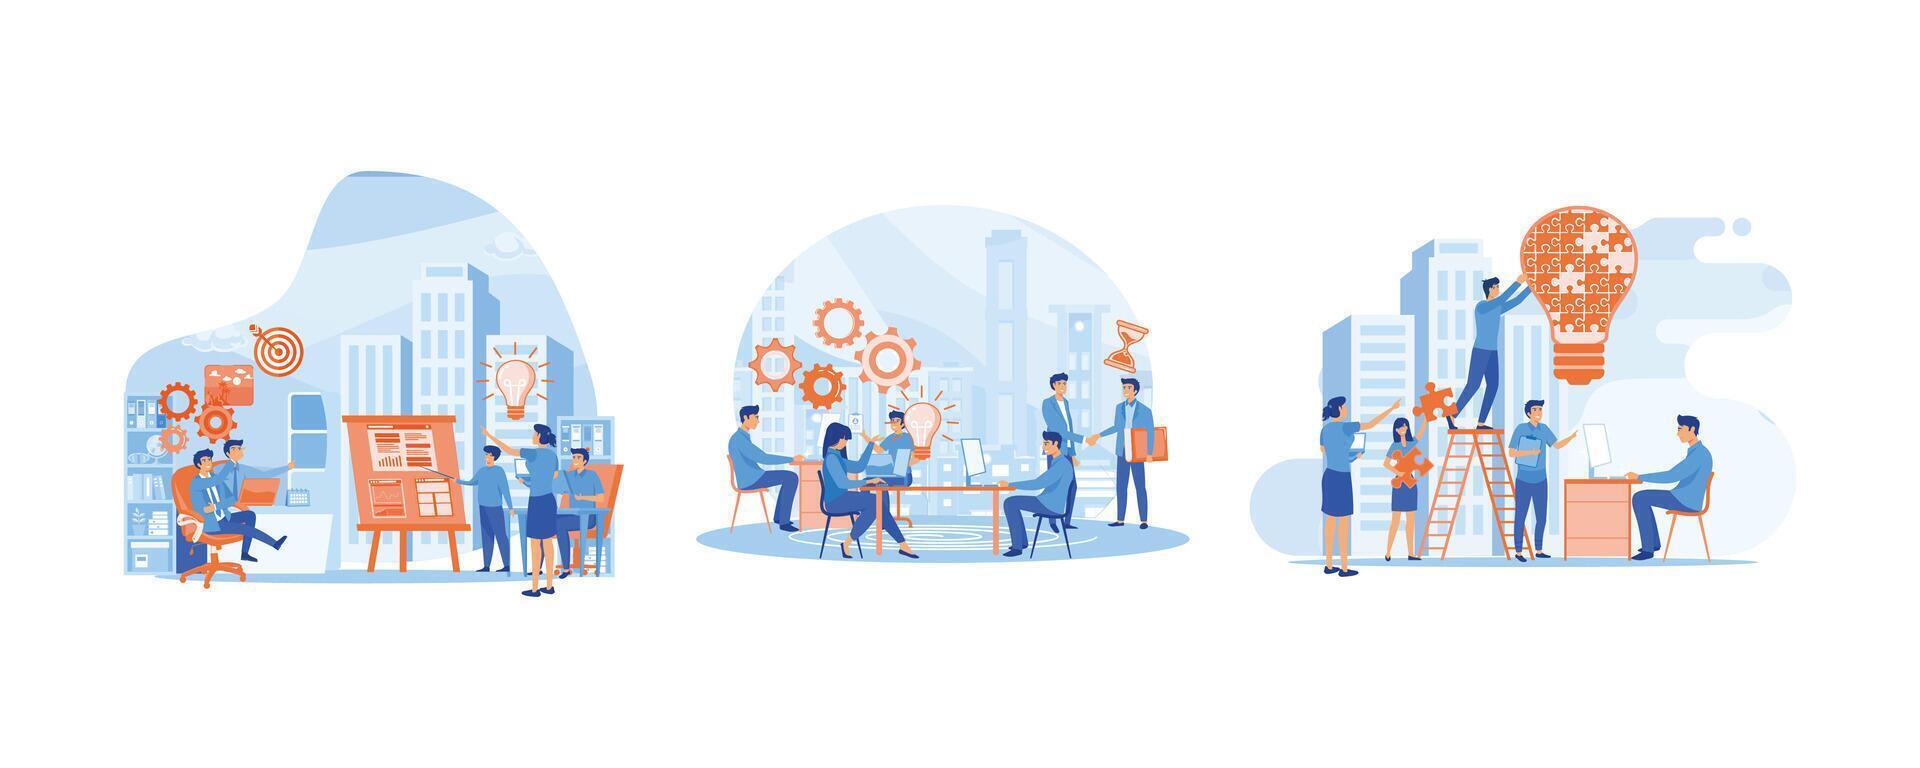 Career advancement. Online assistant at work. Working together in the company, brainstorming. Set flat vector modern illustration